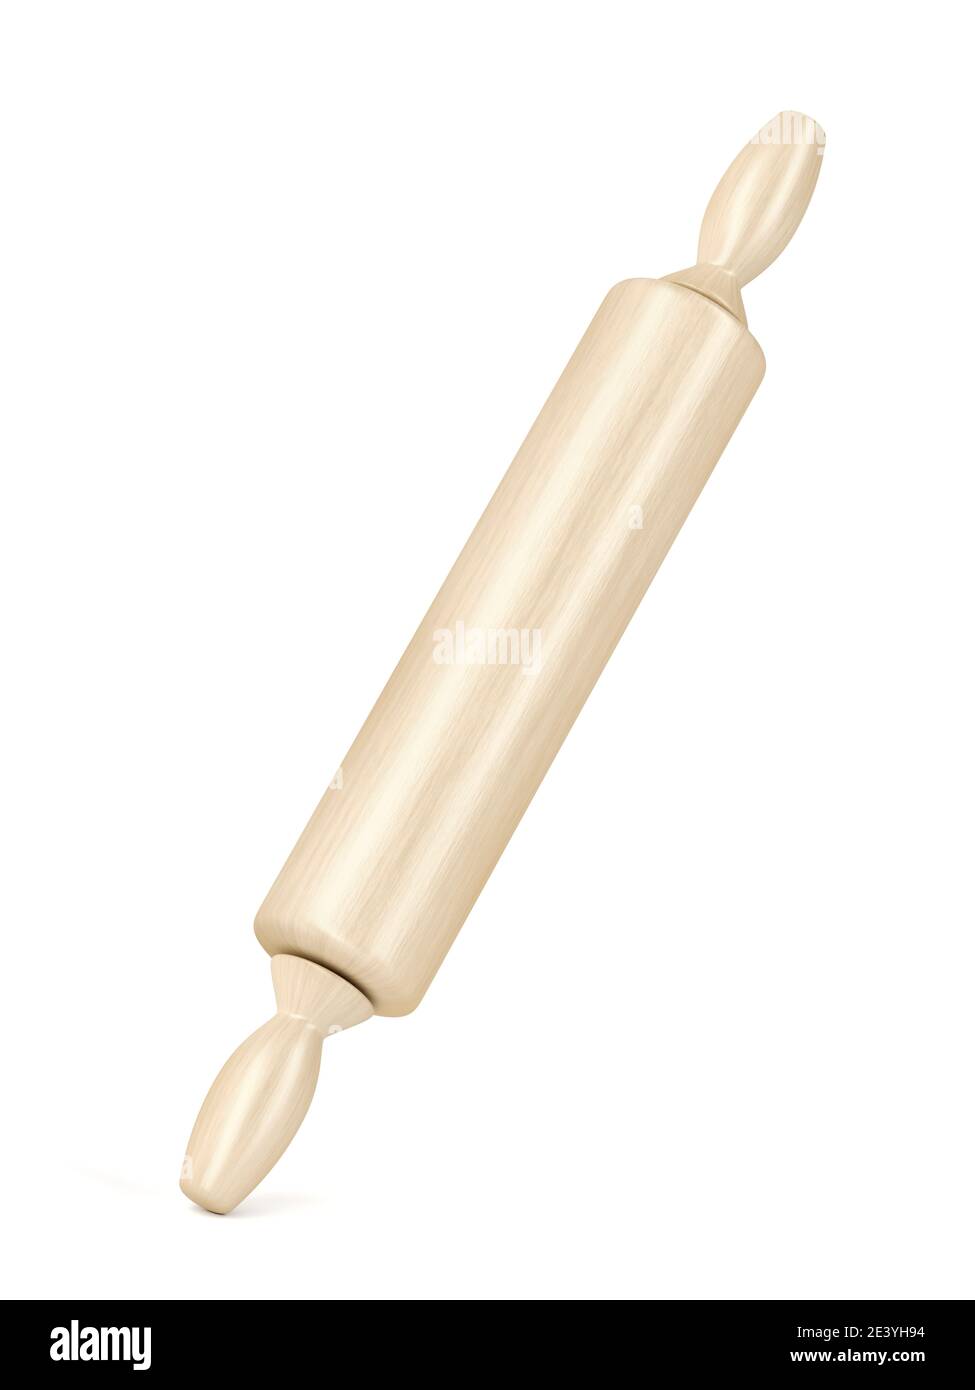 Which Type of Rolling Pin Should I Buy?